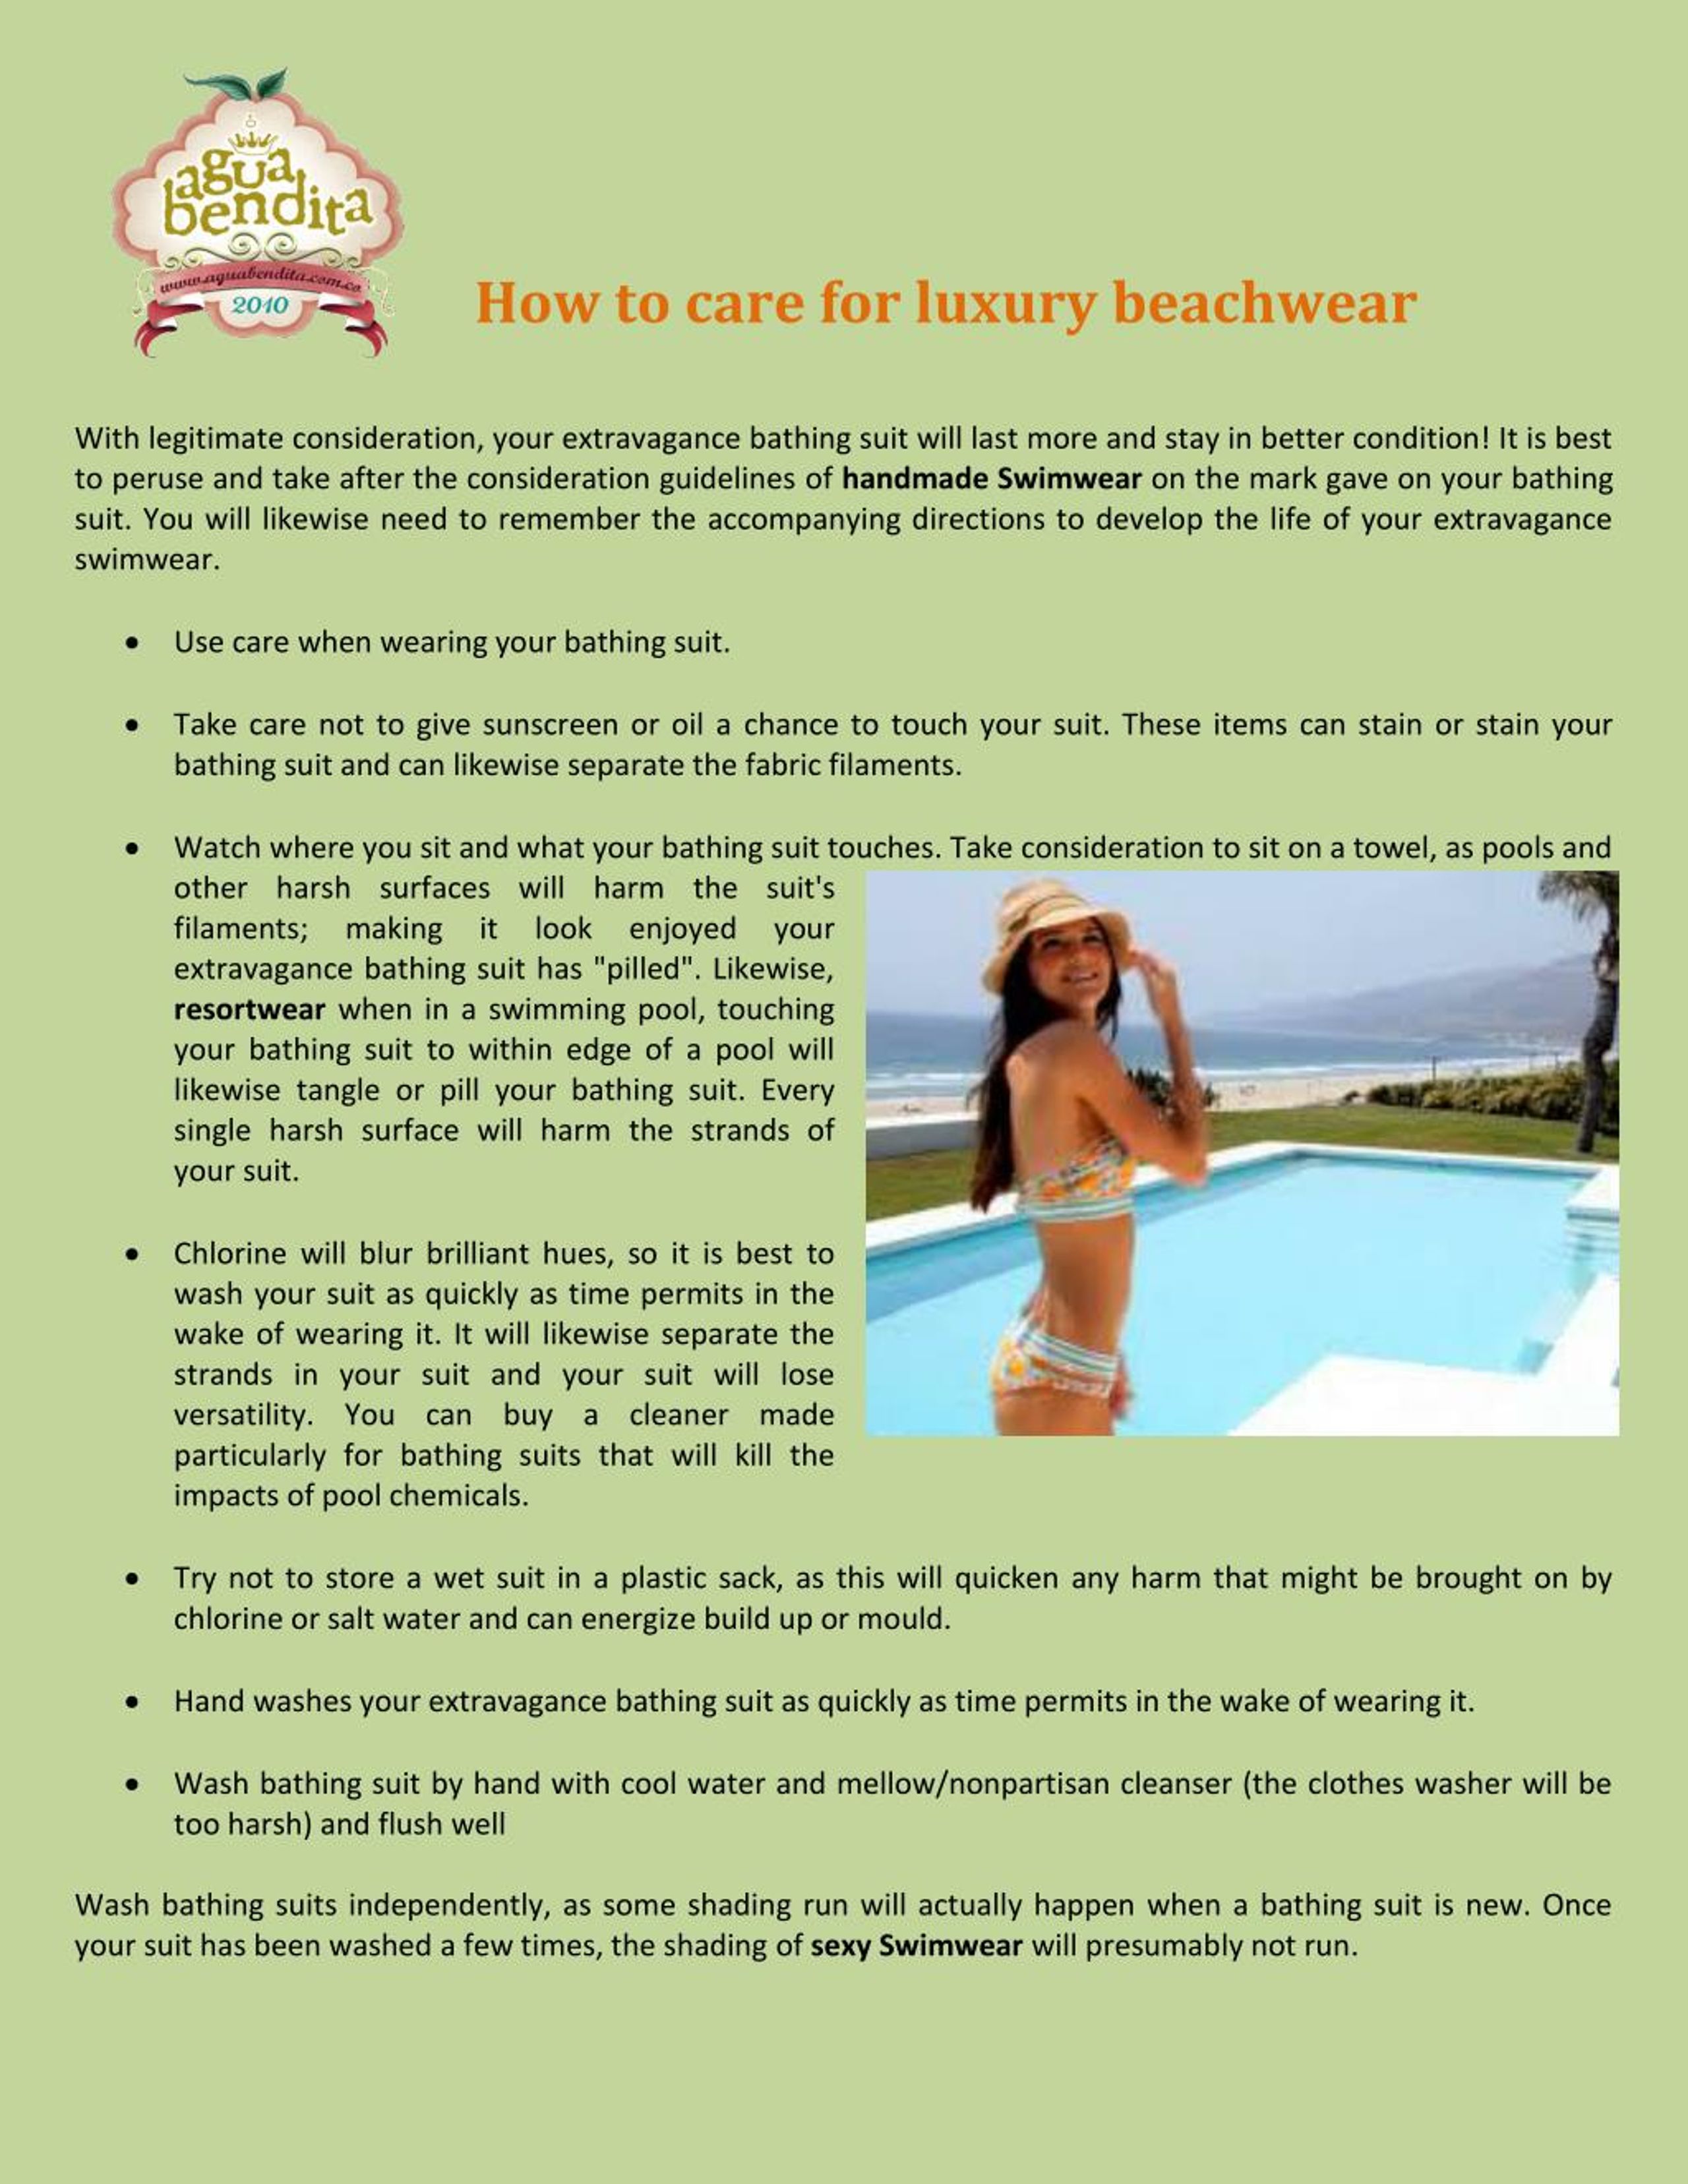 How to Wash Your Bathing Suit